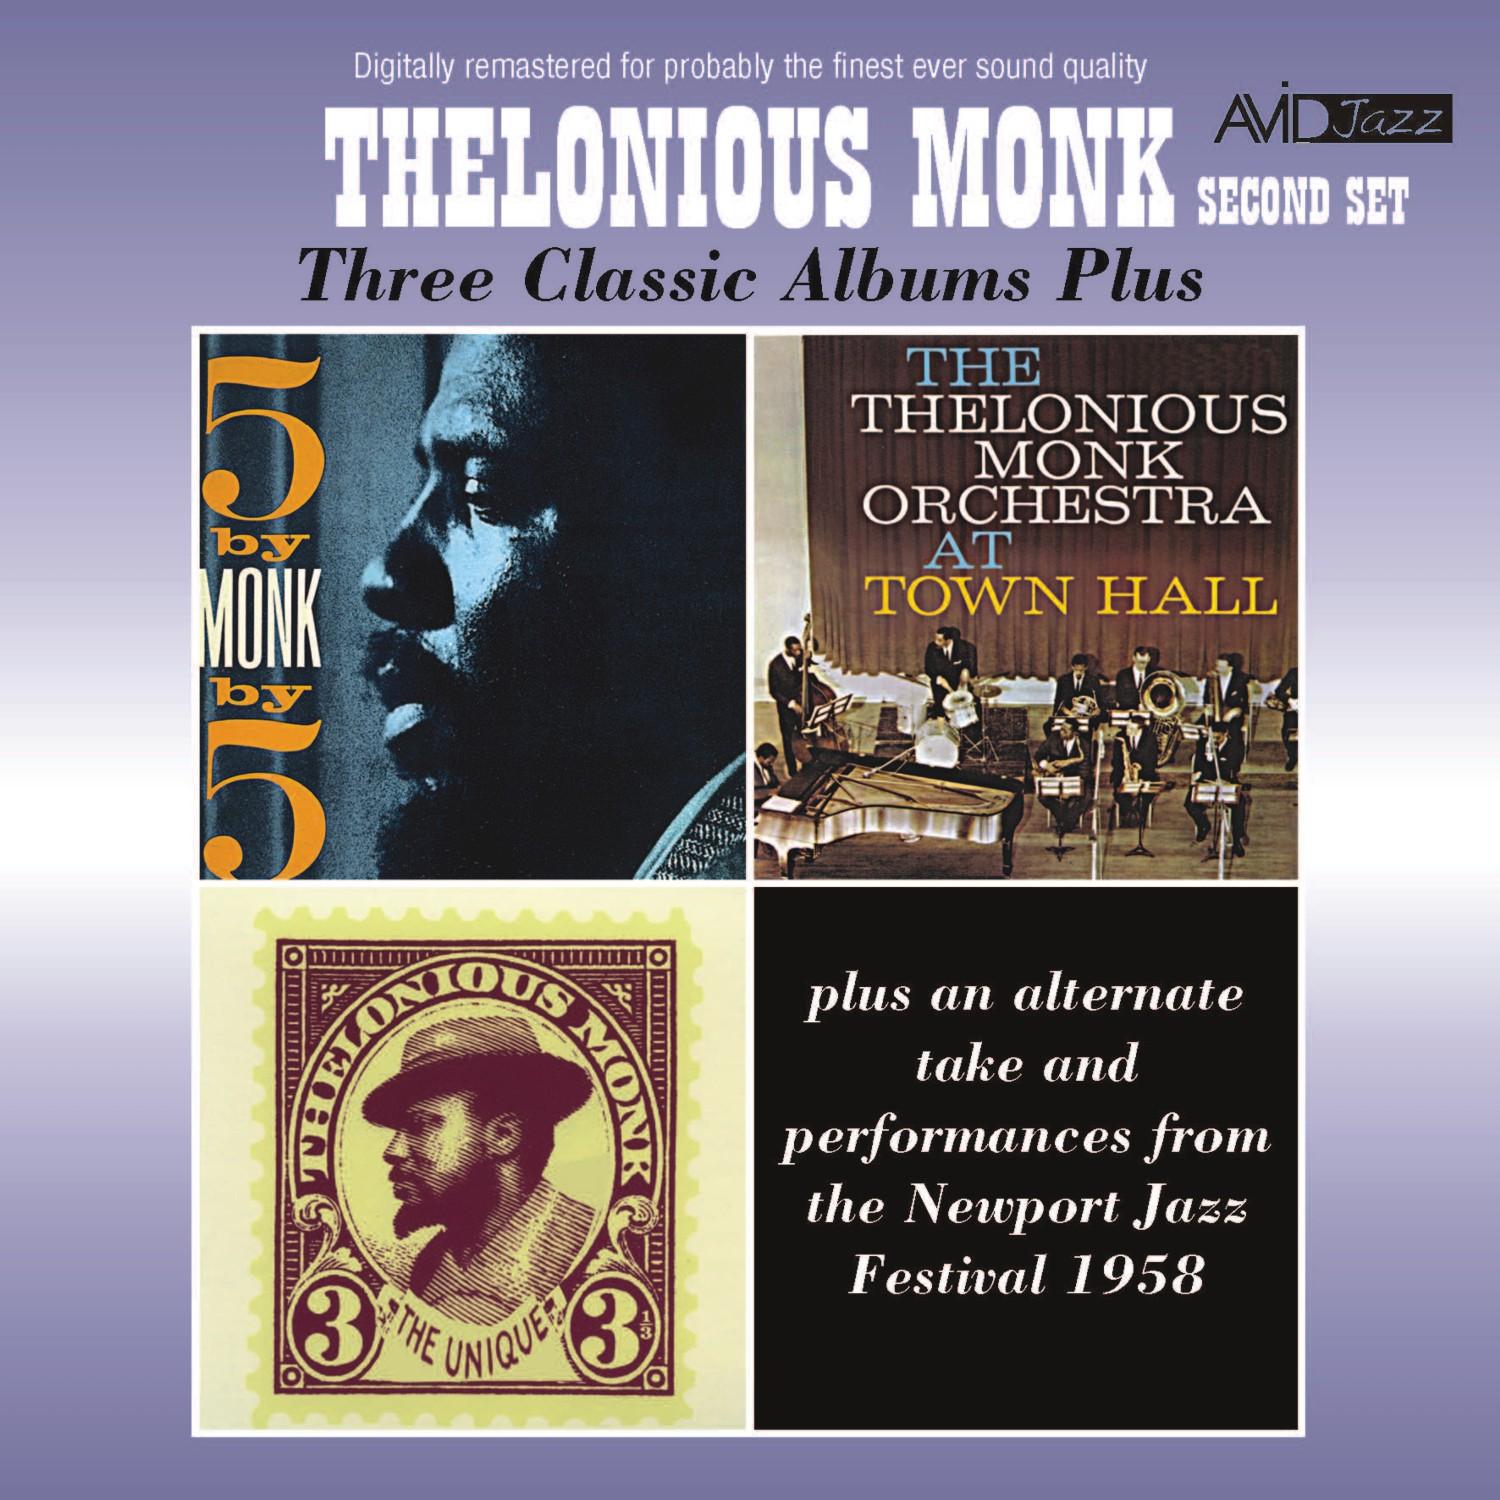 Three Classic Albums Plus (The Unique Thelonious Monk / At Town Hall / 5 by Monk by 5) [Remastered]专辑